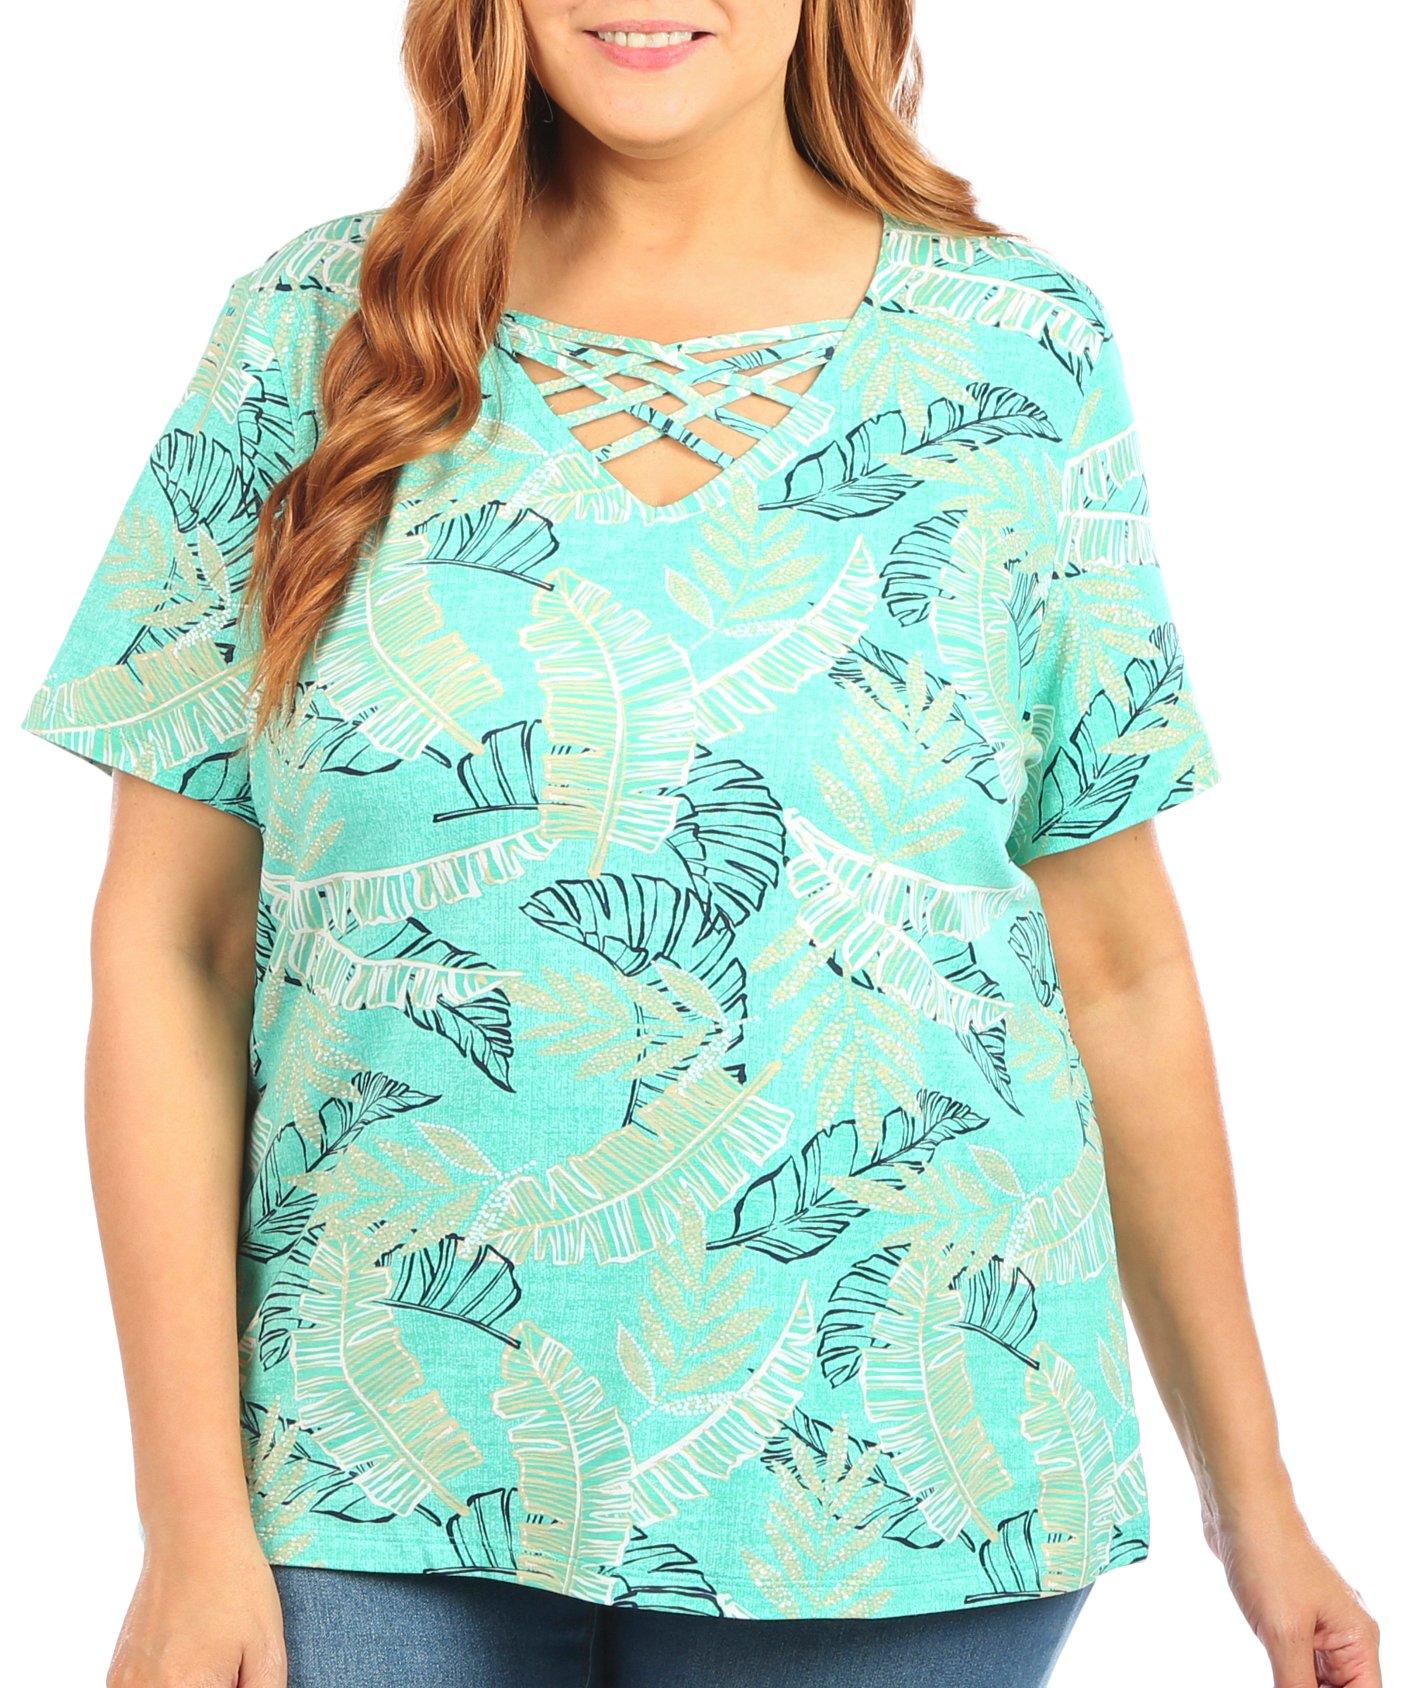 Coral Bay Plus Fronds Woven Keyhole V-Neck Short Sleeve Top